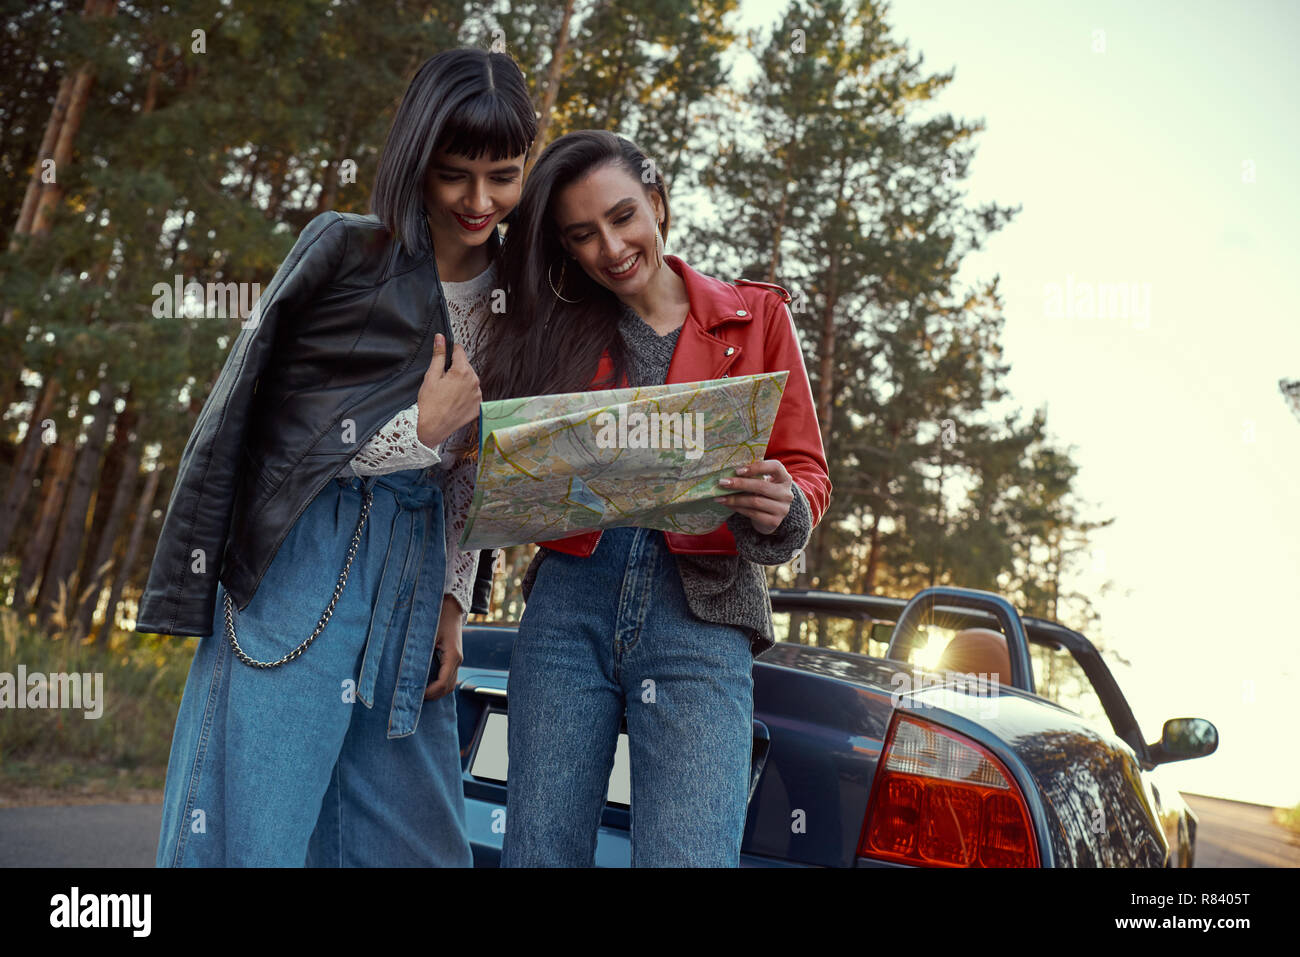 Two women trying to find the way on map near cabriolet Stock Photo